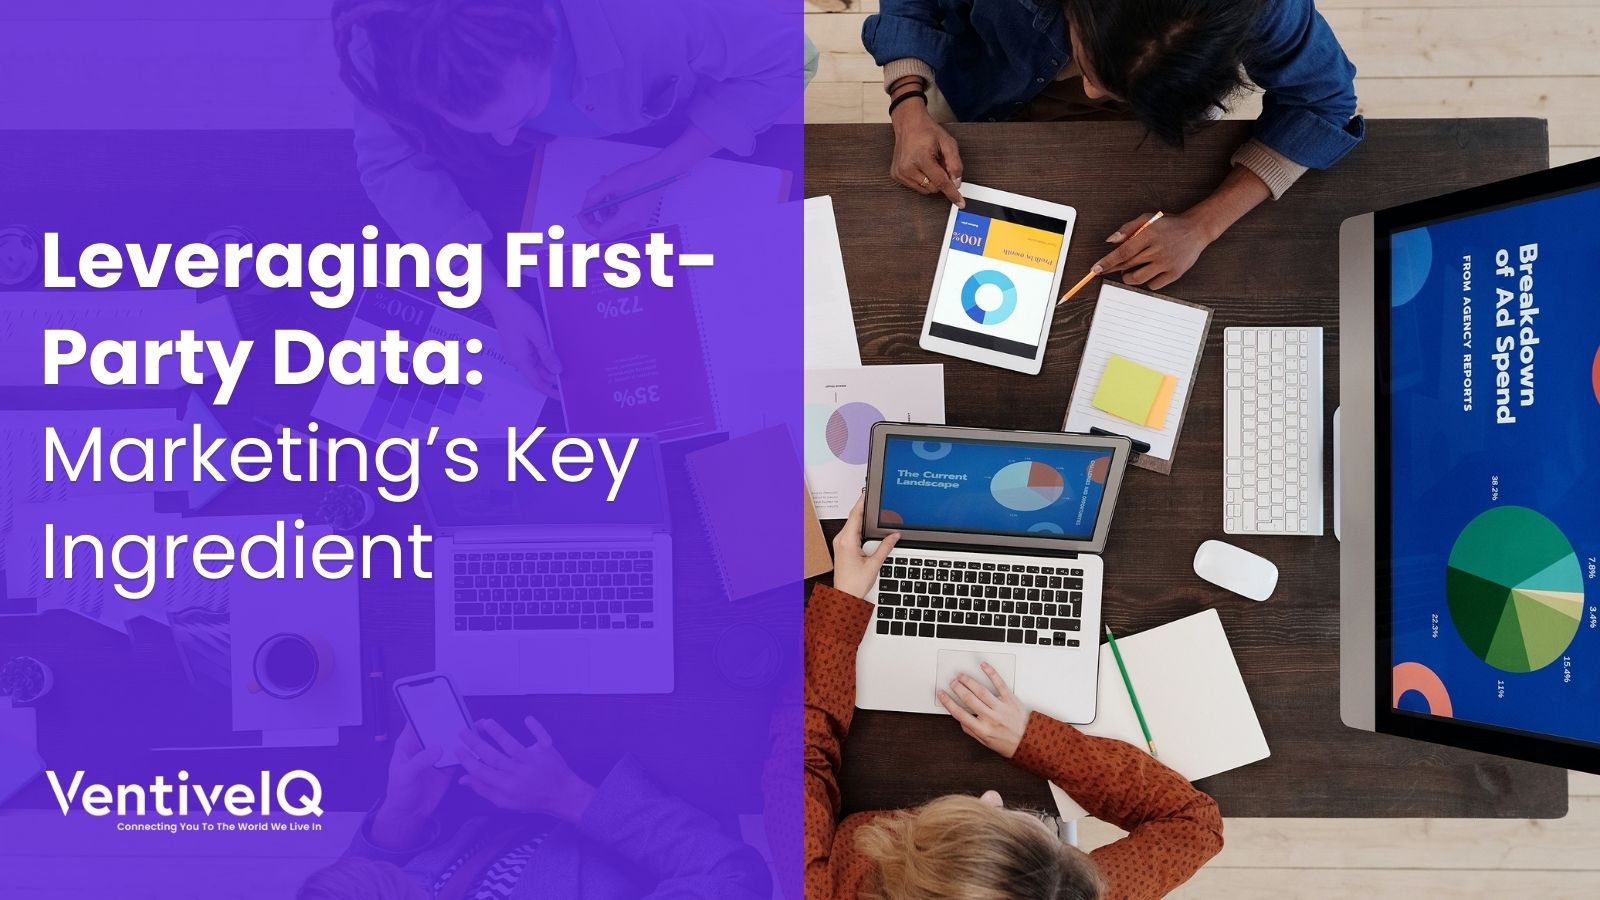 Leveraging First-Party Data: Marketing’s Key Ingredient